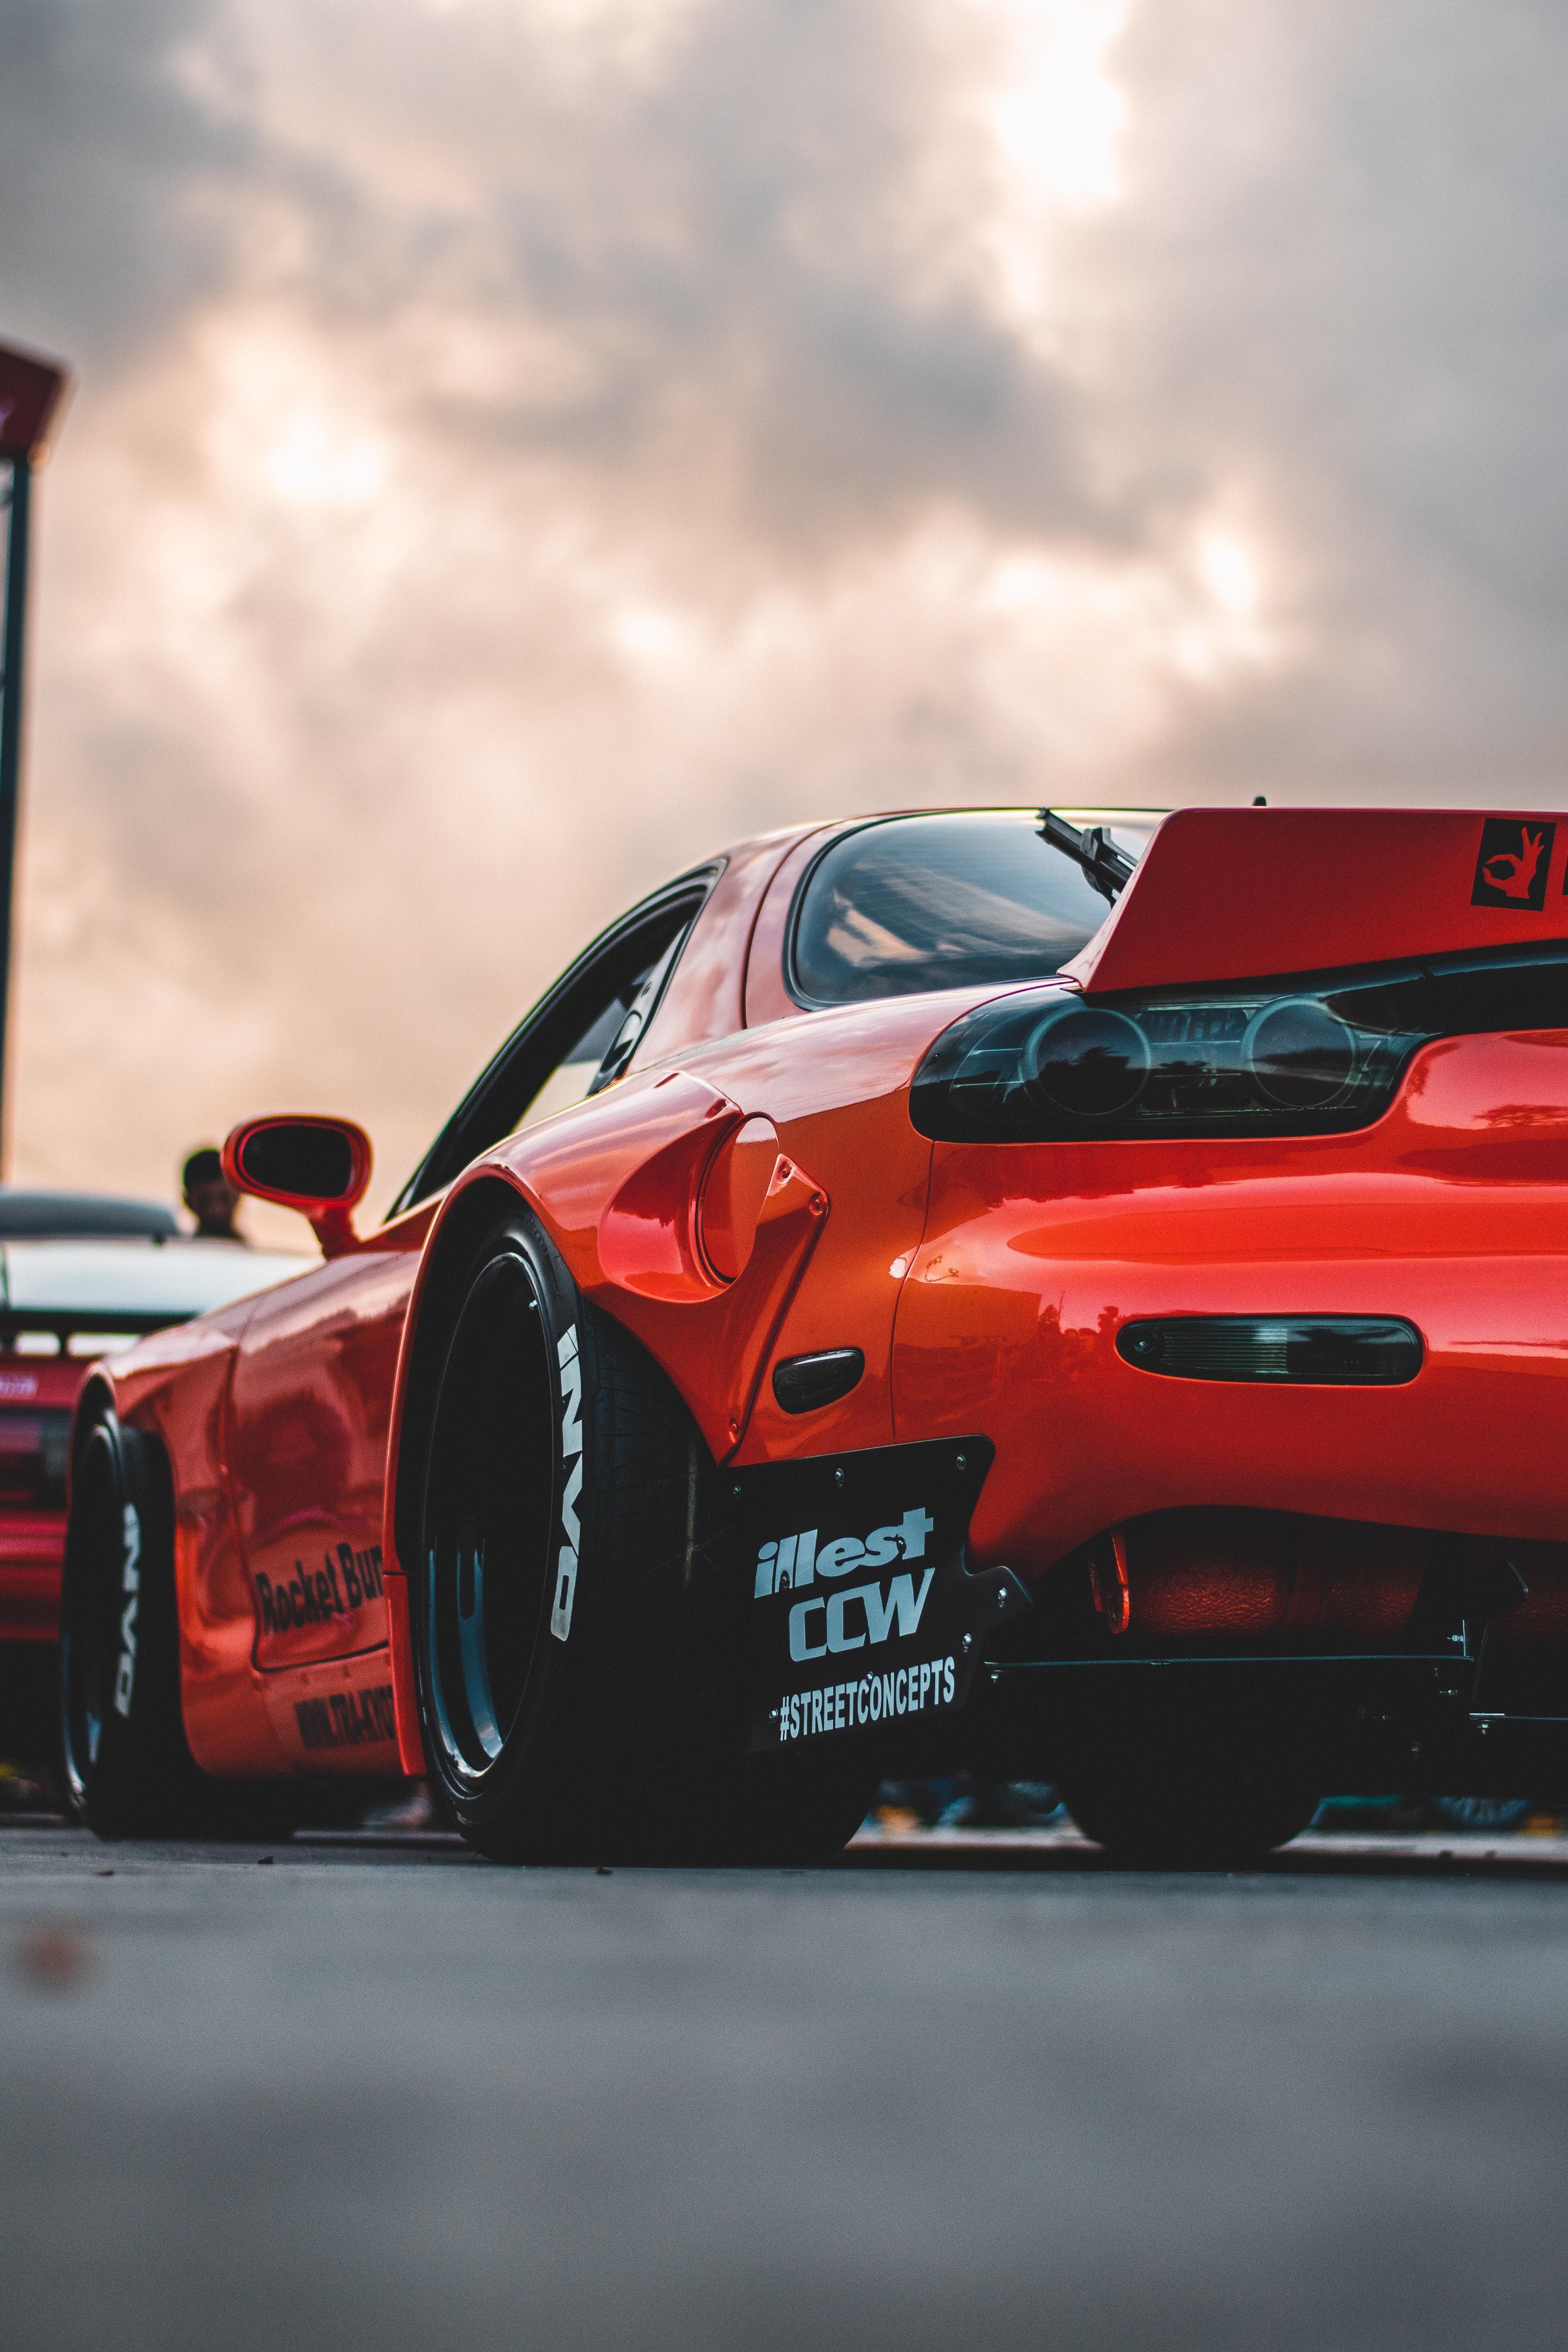 This rocket bunny RX7 I saw the other day. Posted by triniamit #cars #motorcycles. Best jdm cars, Street racing cars, Japan cars